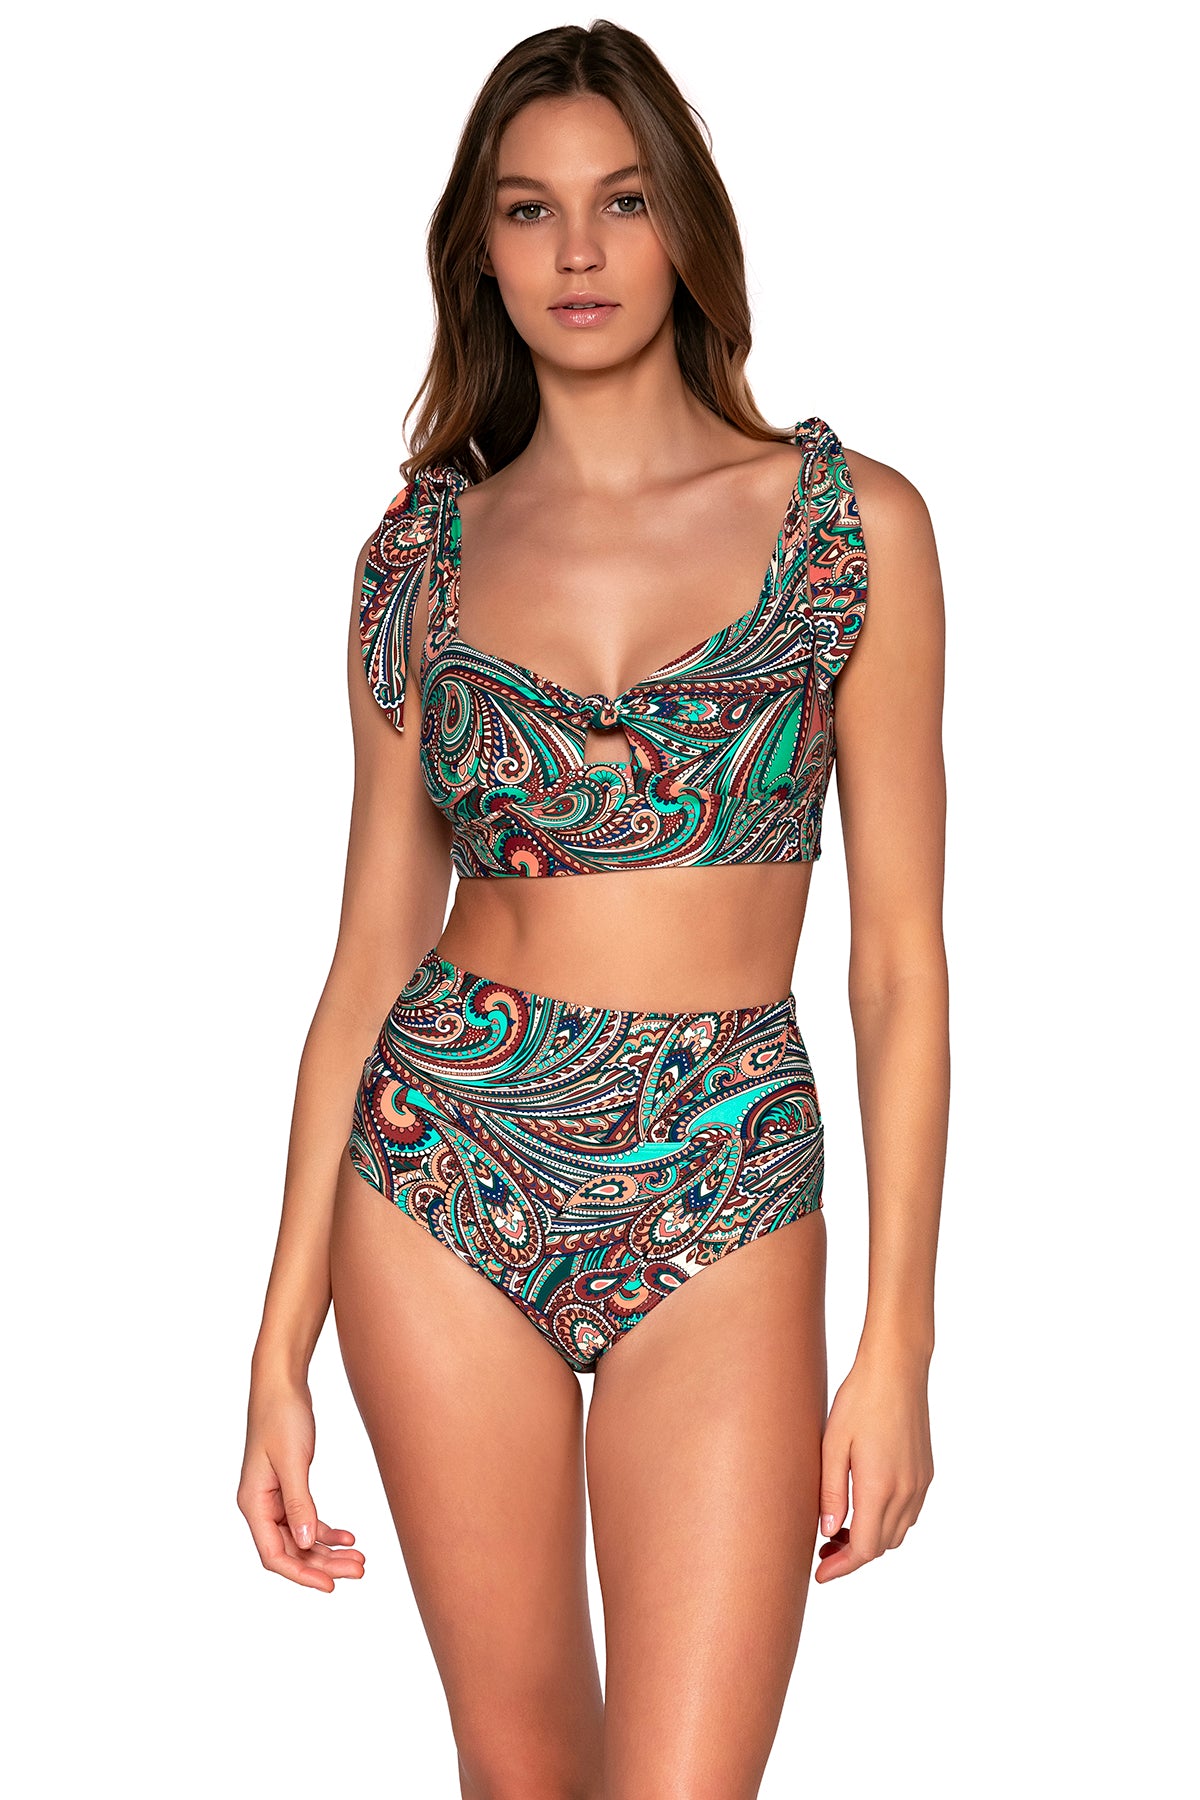 Front view of Sunsets Andalusia Hannah High Waist Bottom with matching Lily Top bikini